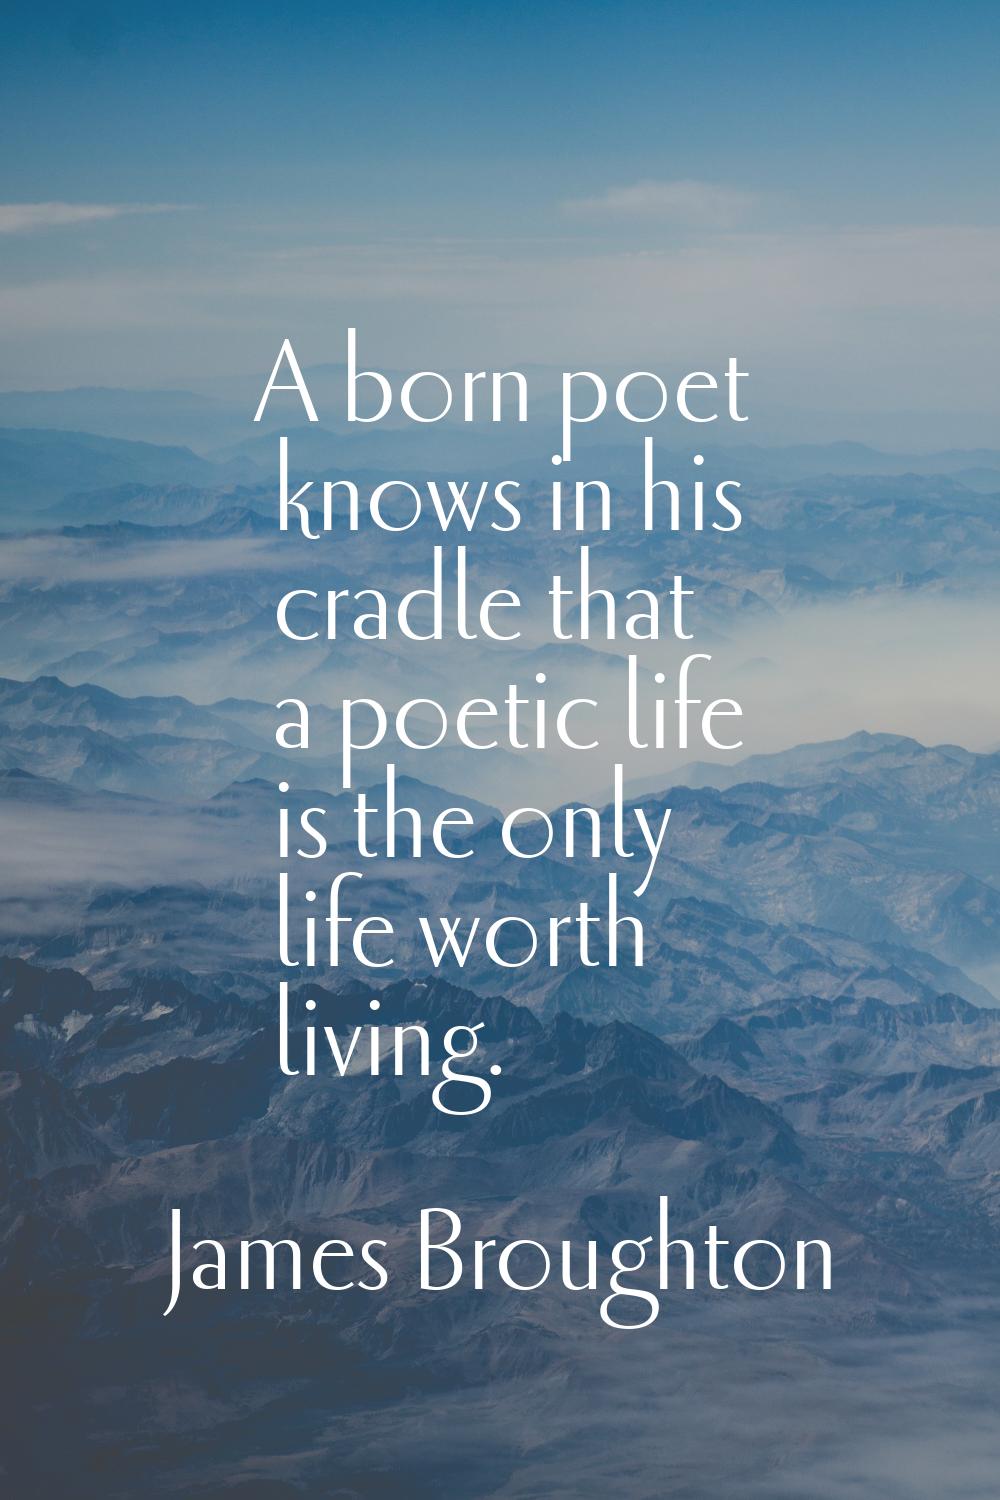 A born poet knows in his cradle that a poetic life is the only life worth living.